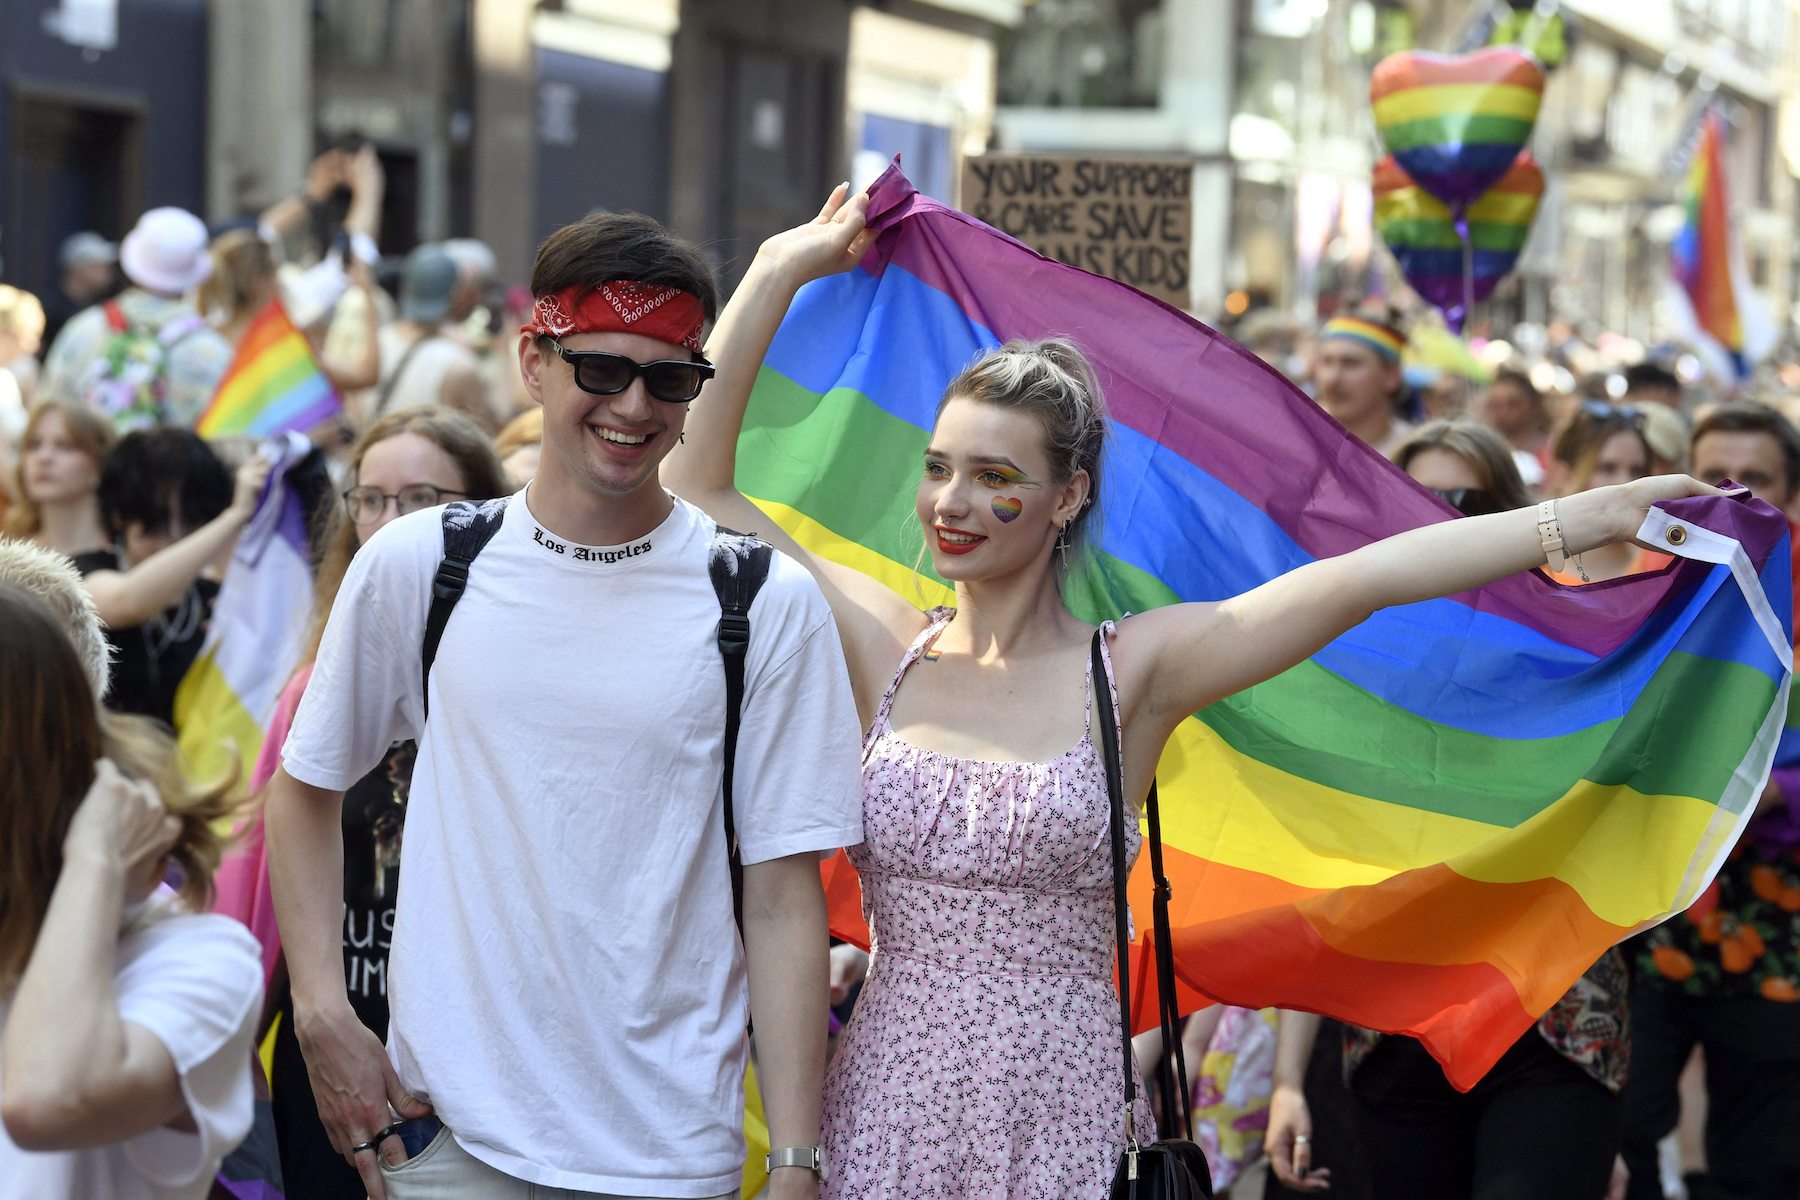 Finland Has Passed A New Law Allowing People To Self-Identify Their Legal Gender